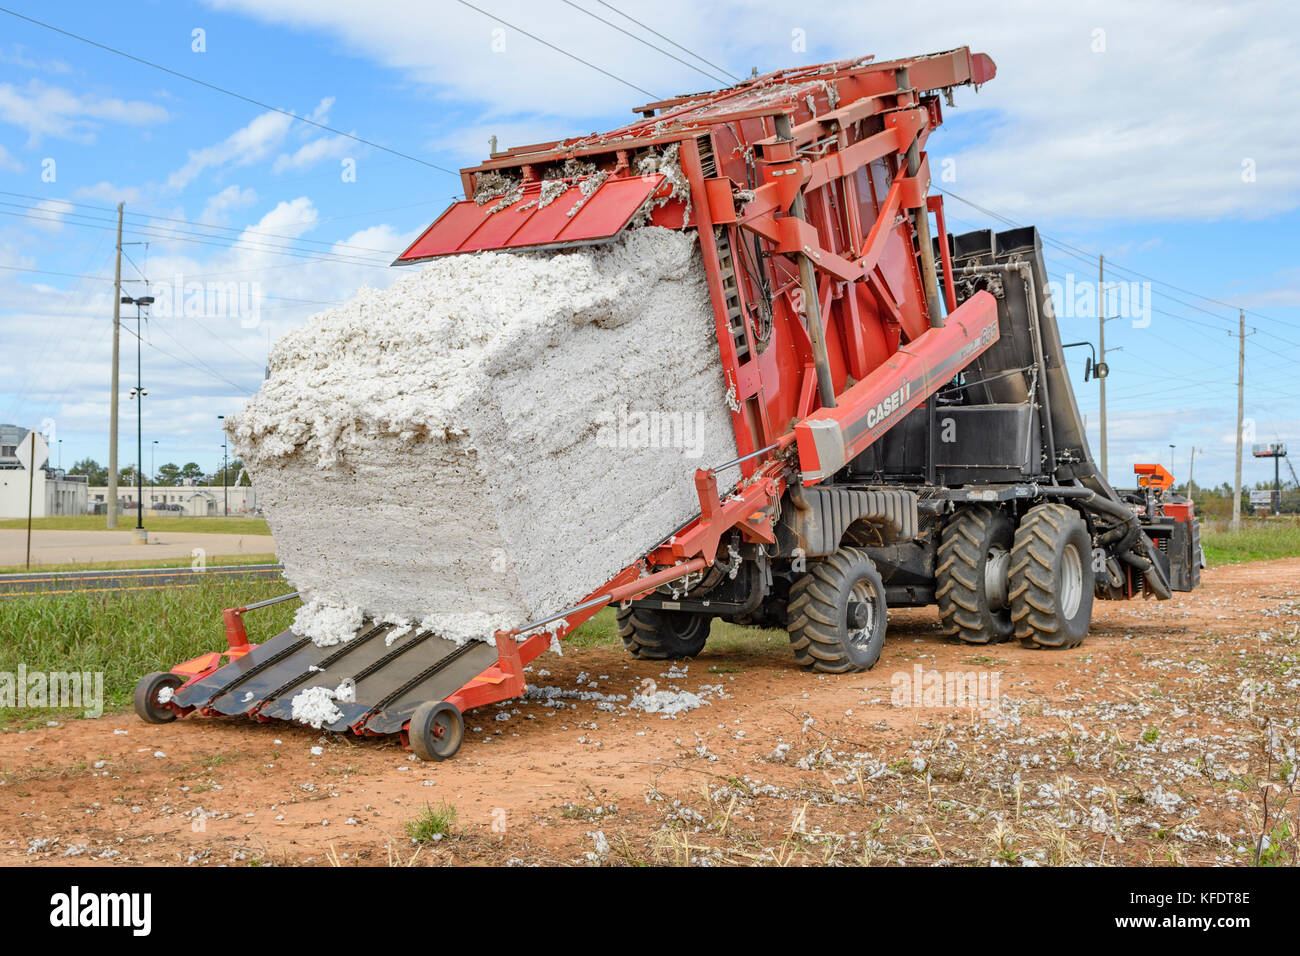 Case IH Module Express 635 tilting back to empty its receiving bay of freshly picked cotton on a cotton farm in rural Alabama. Stock Photo